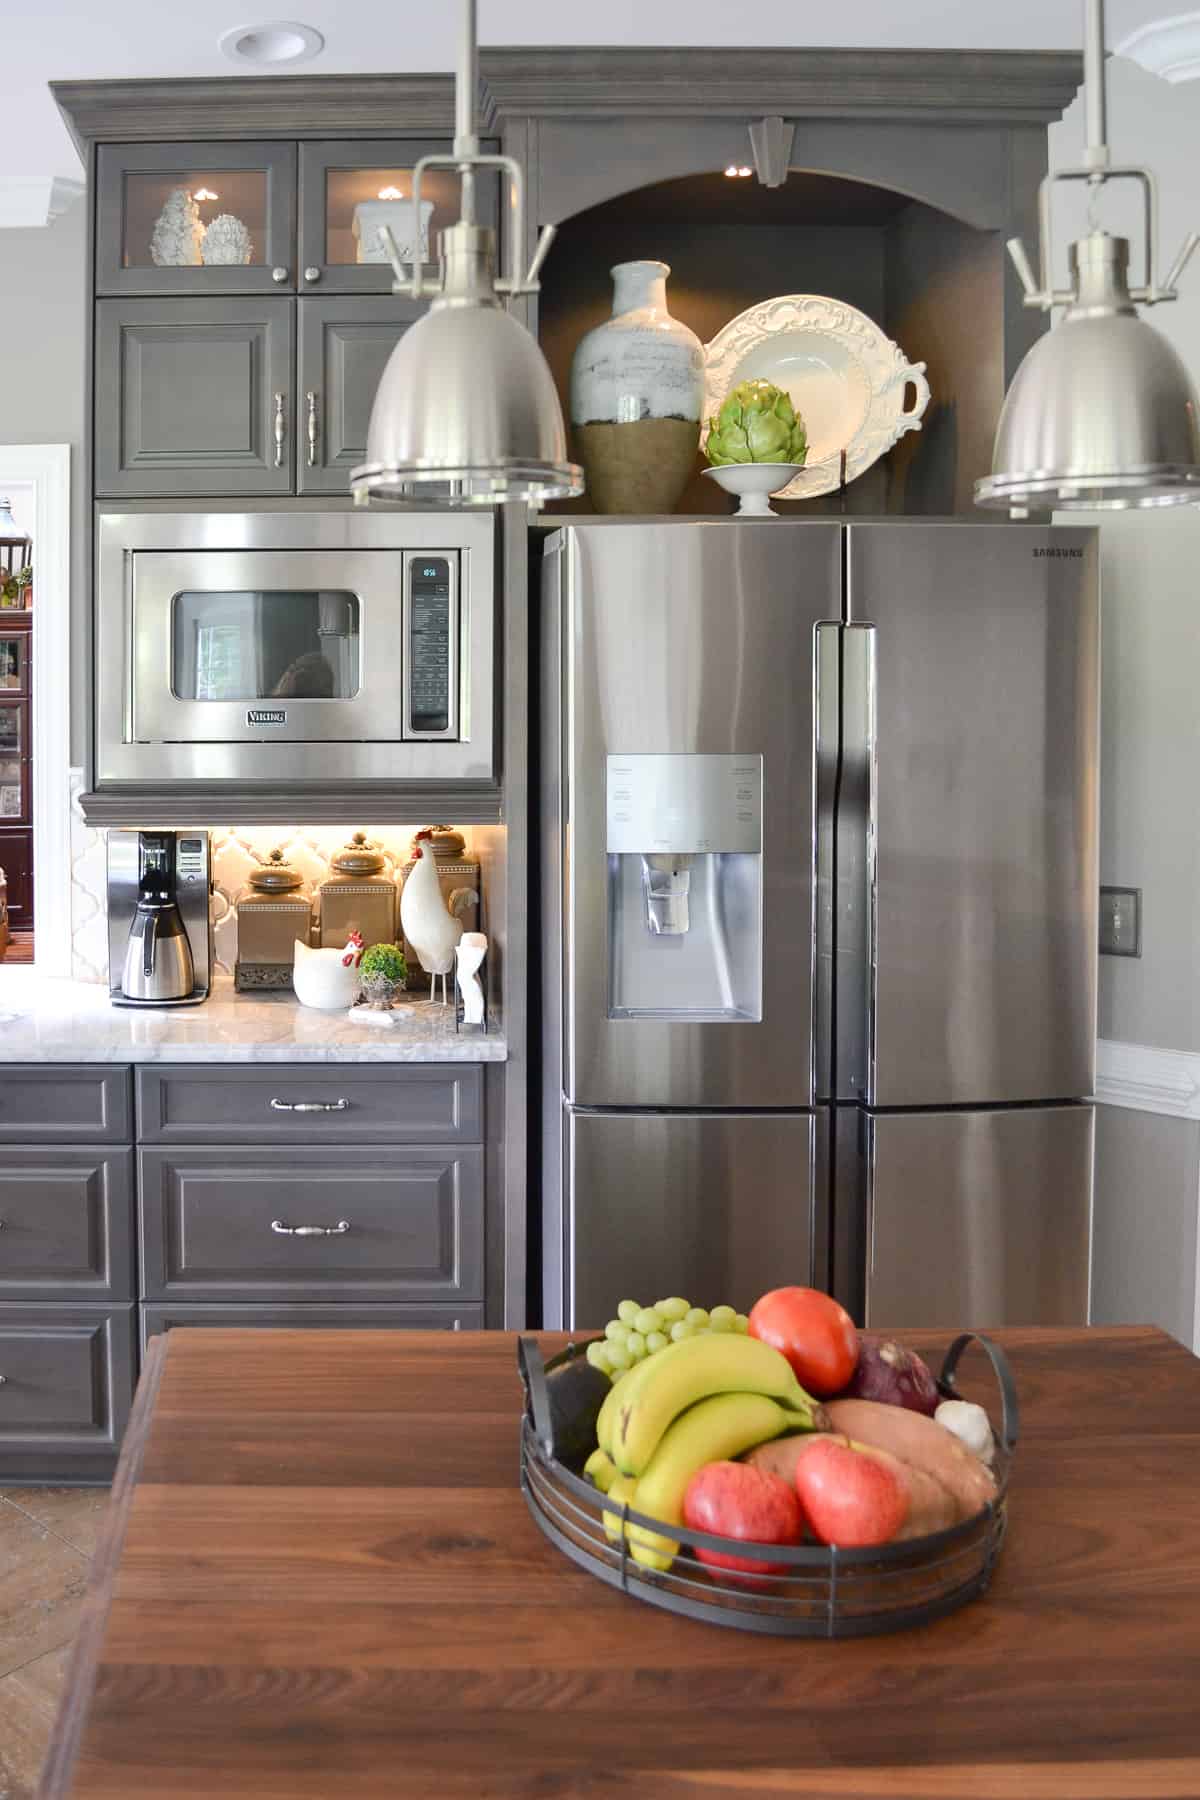 A Jaw-Dropping Gorgeous Kitchen Remodel – Before And After